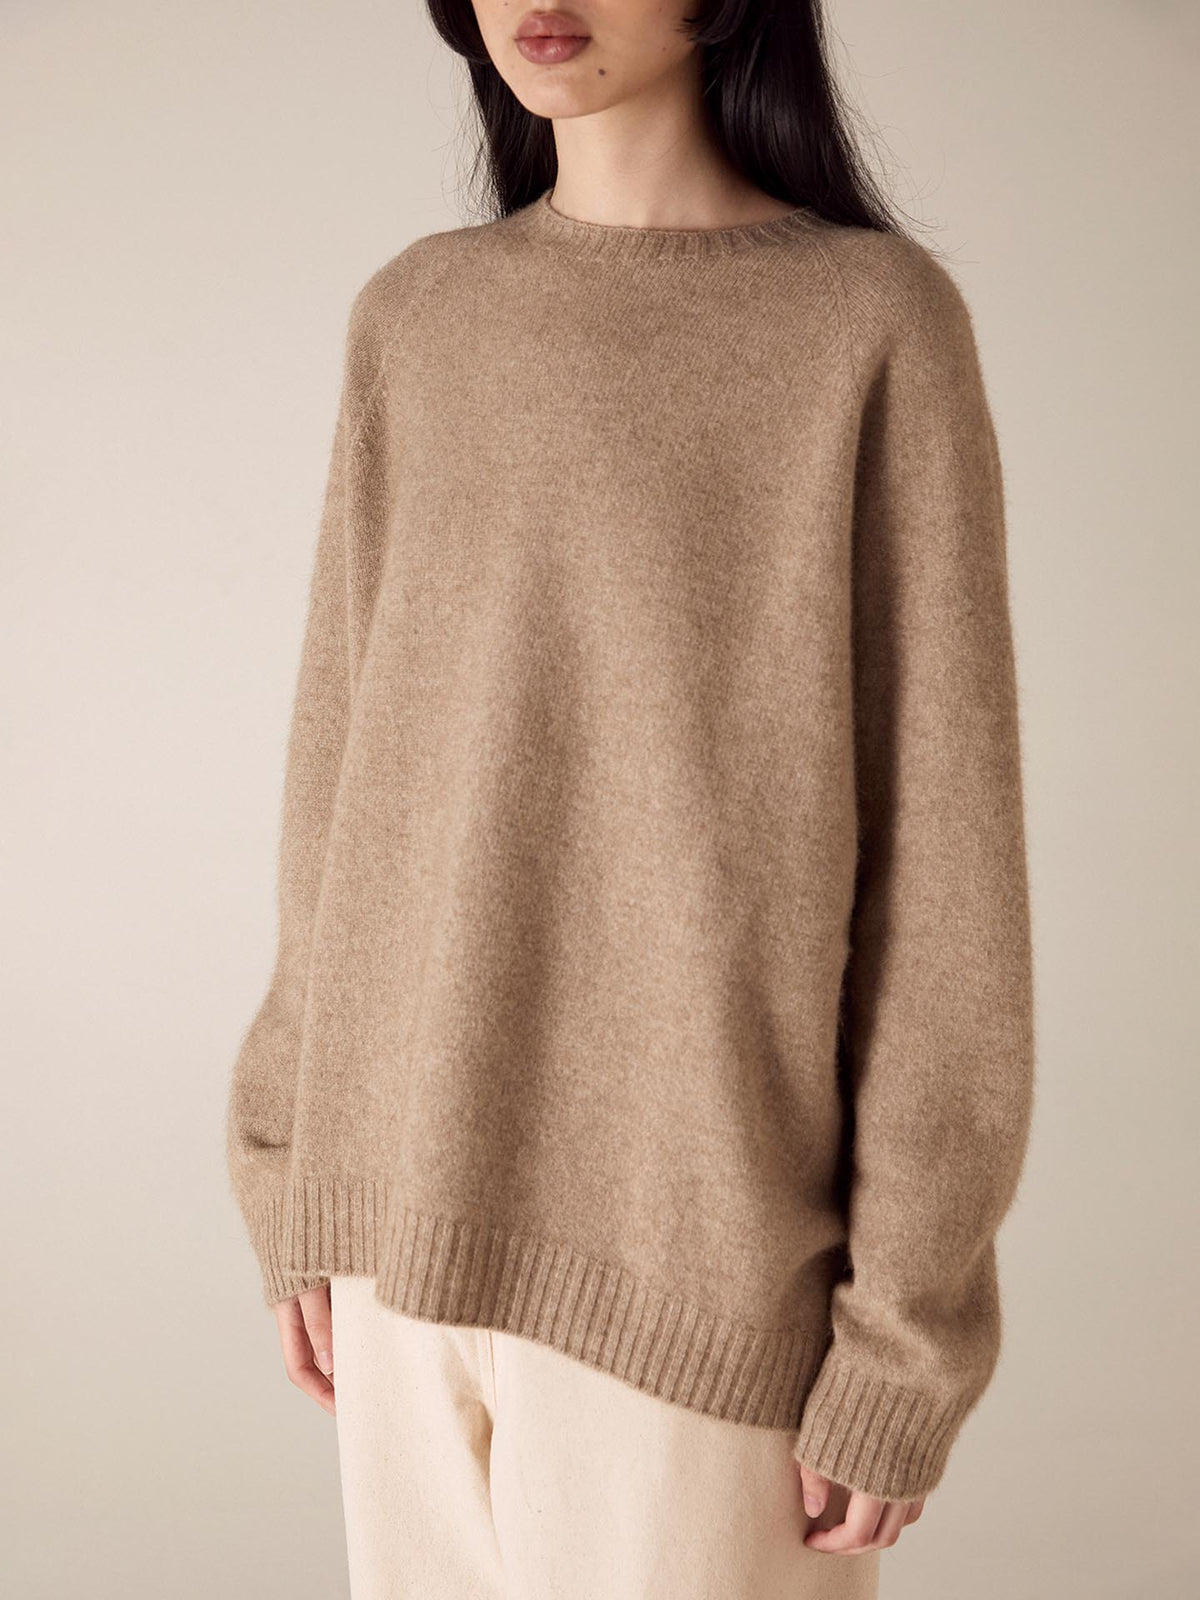 A person in a Francie Nimbus Raglan Knit - Natural sweater with a relaxed fit stands against a neutral background, focus on the texture and fit of the sweater.